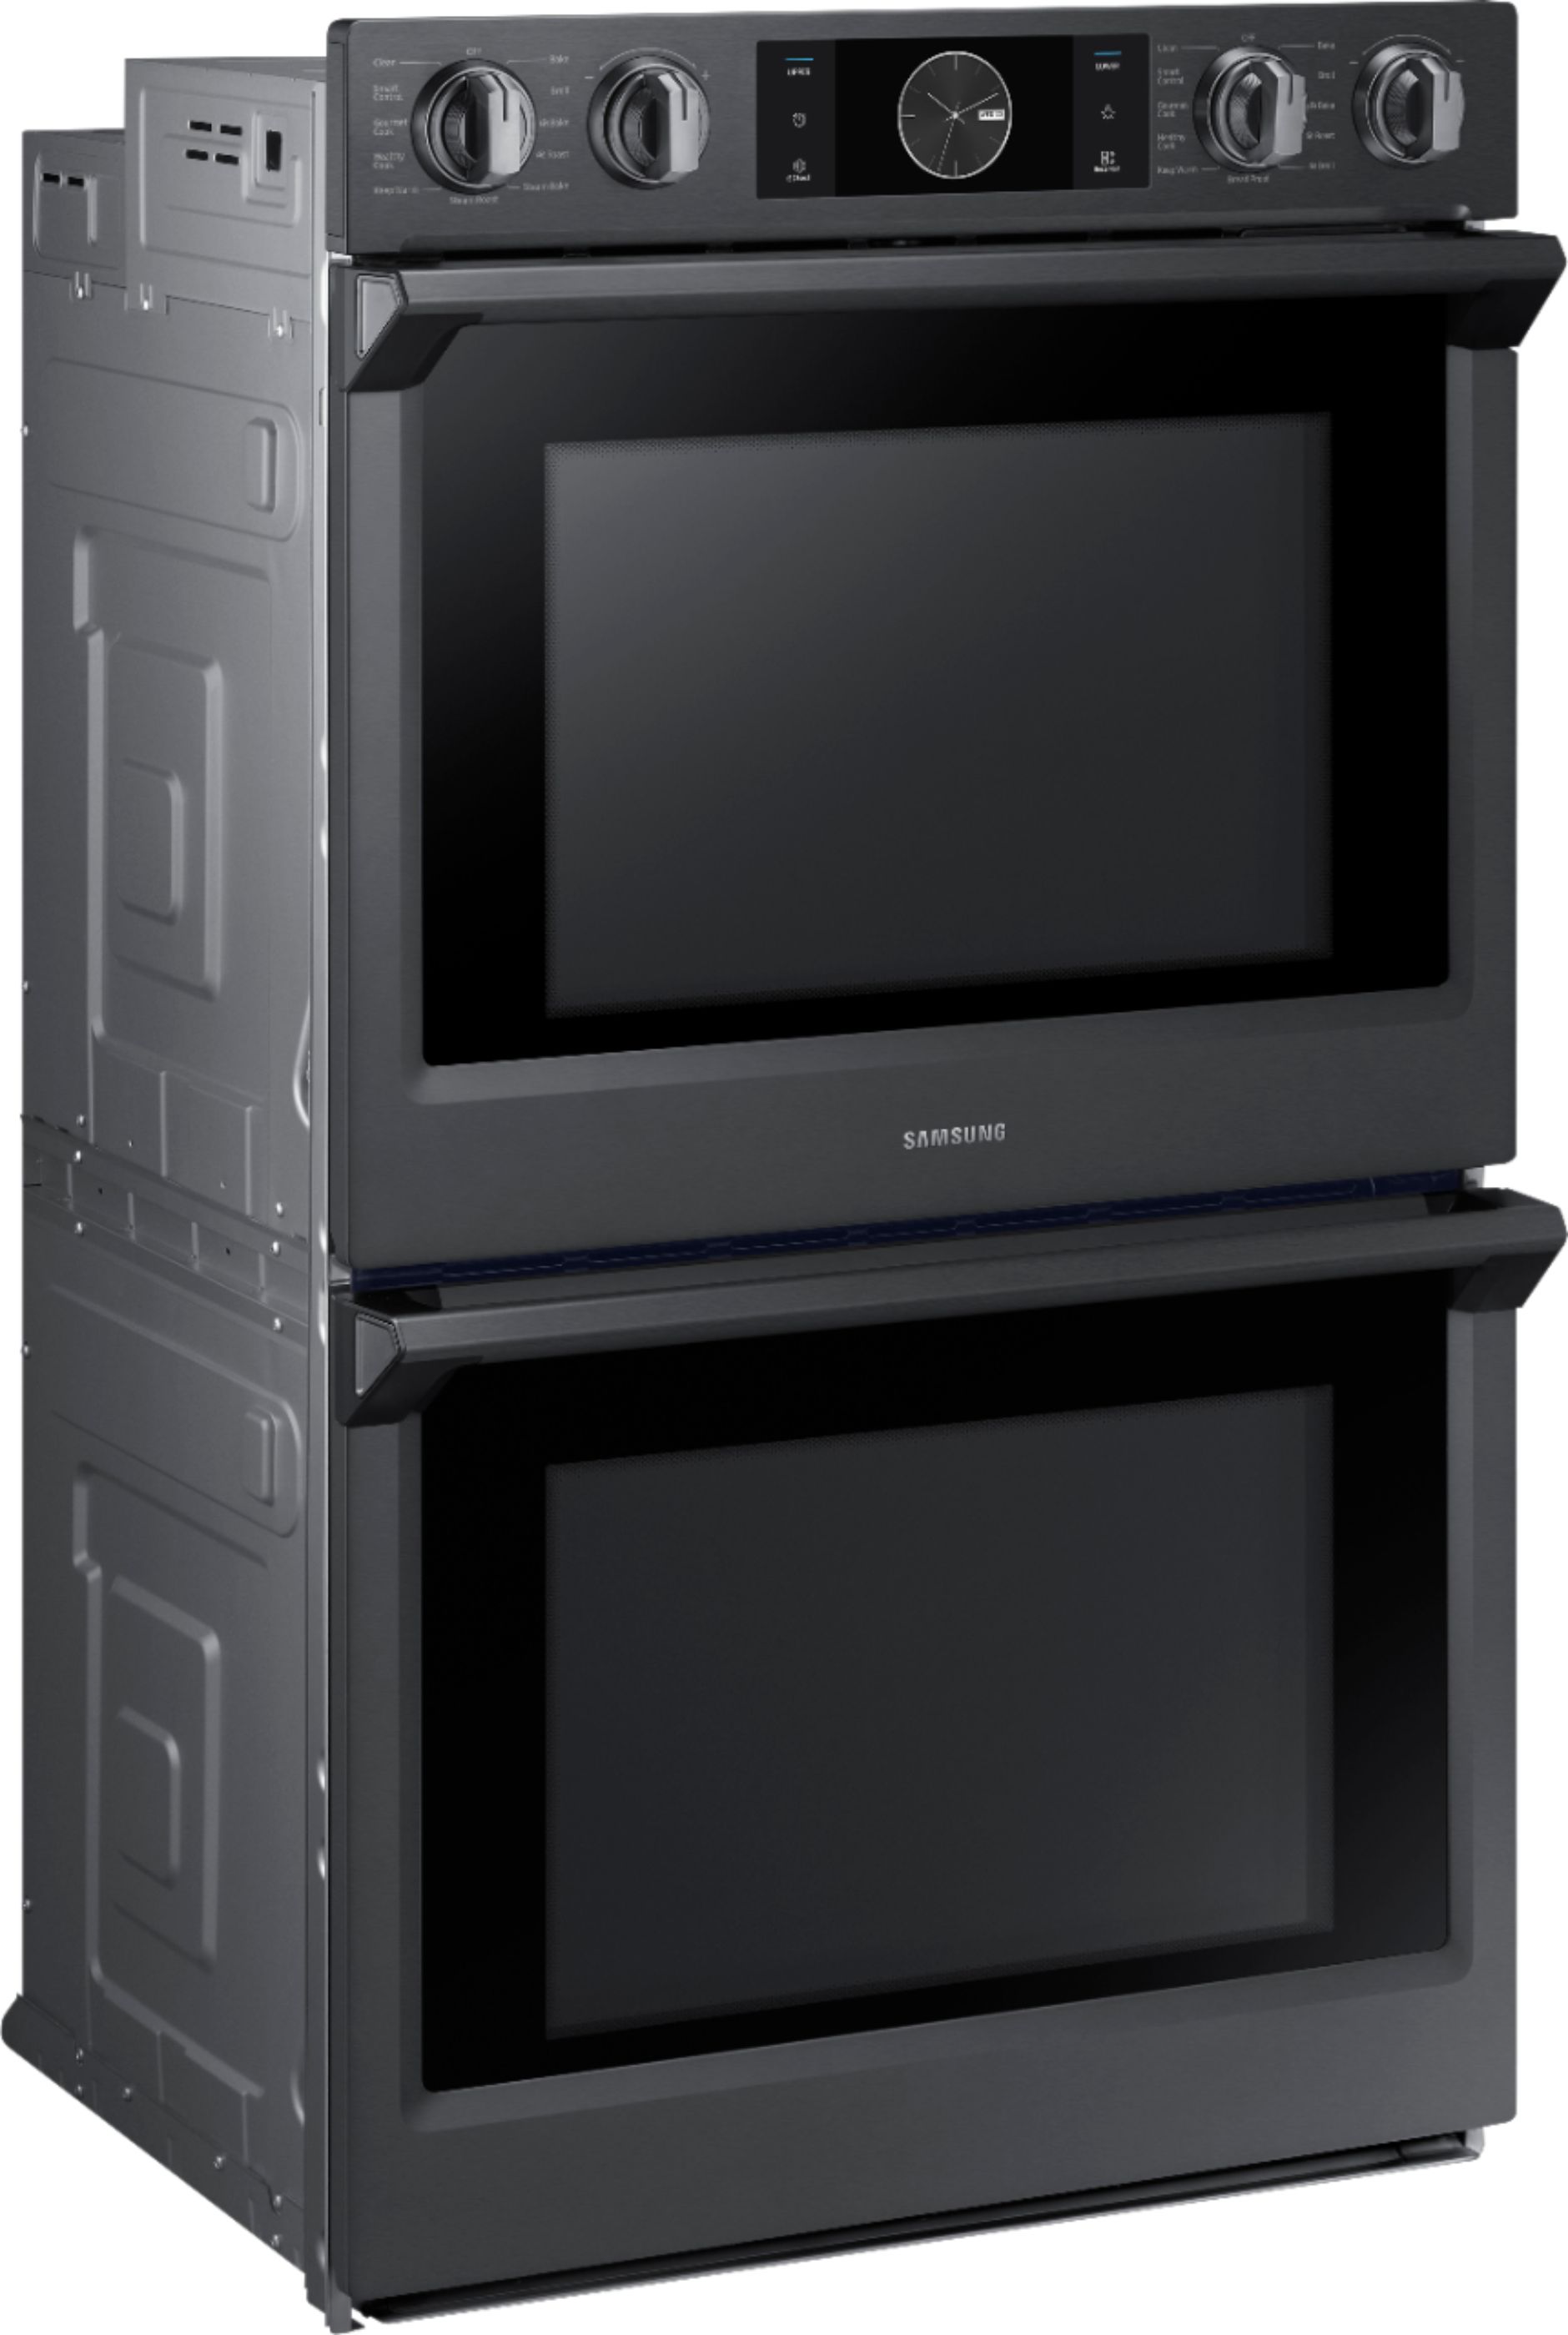 Angle View: Samsung - 30" Double Wall Oven with Flex Duo, Steam Cook and WiFi - Black Stainless Steel